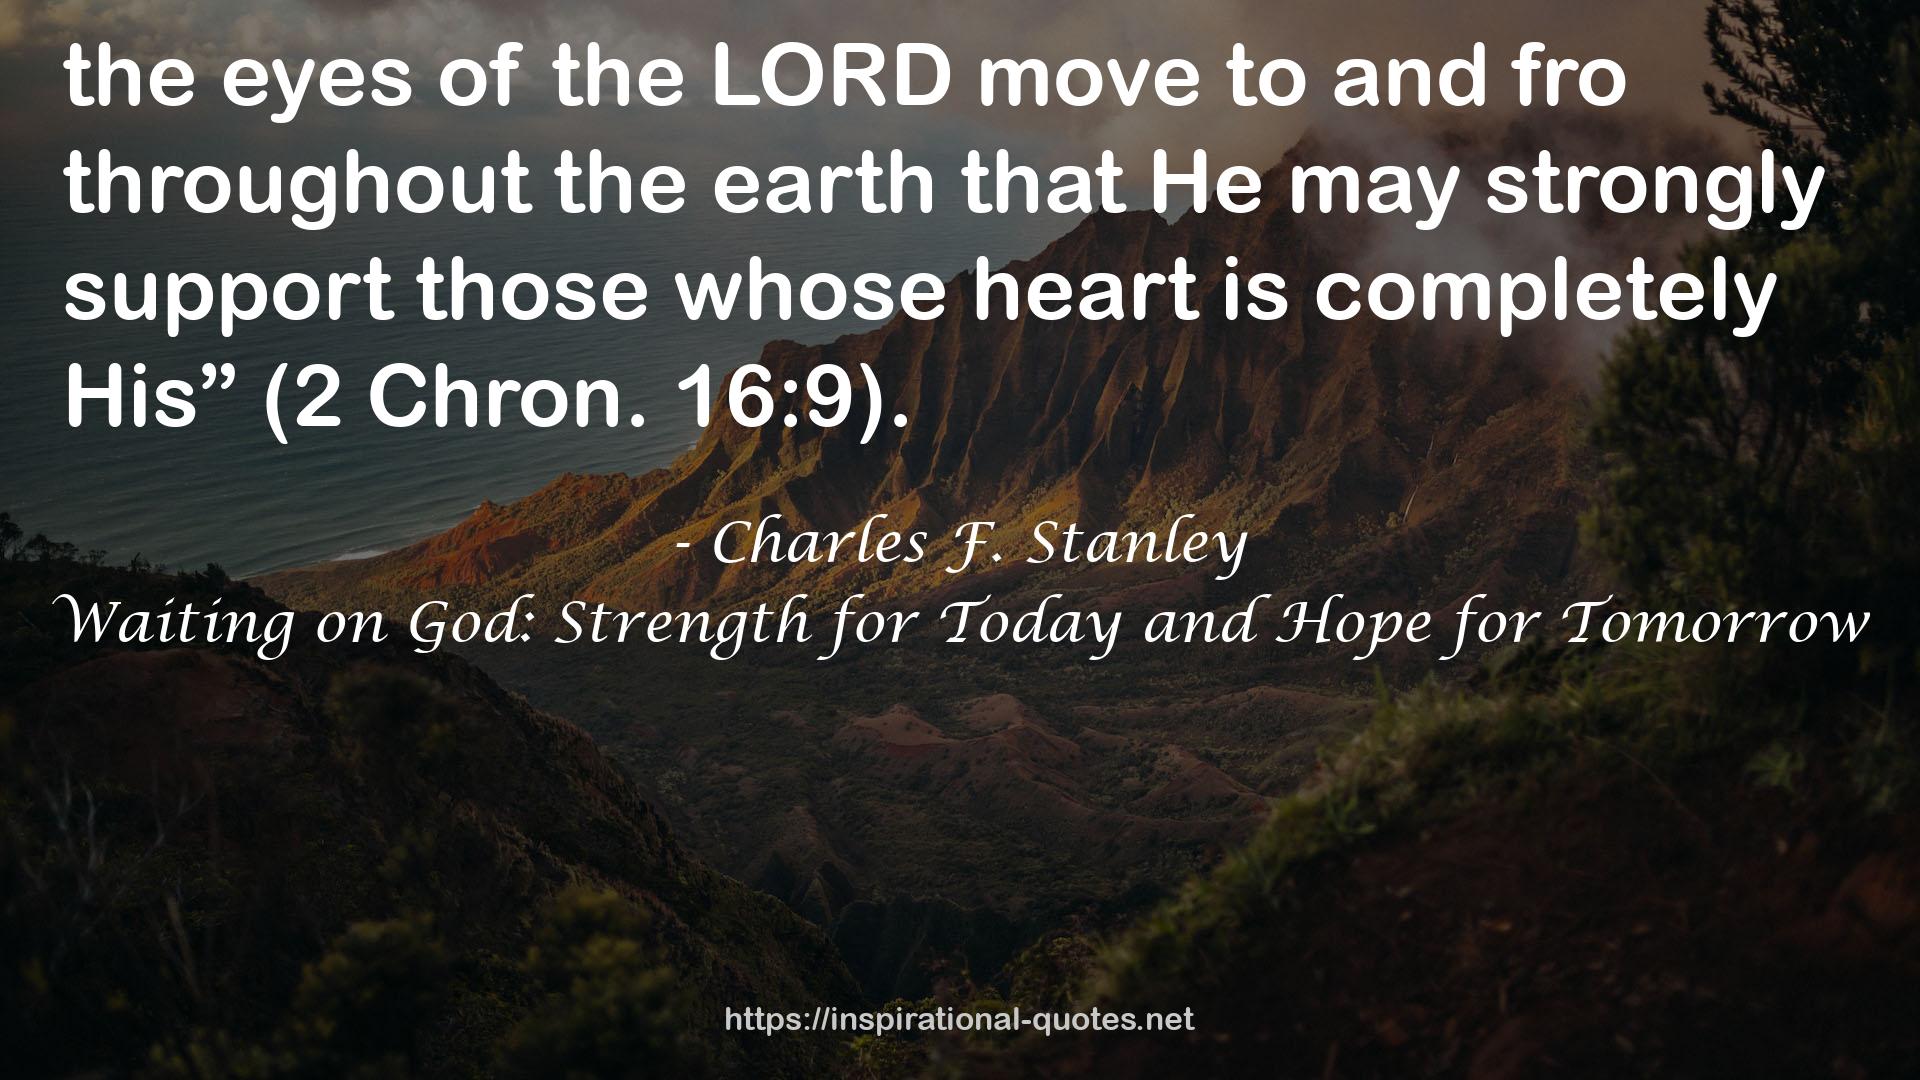 Charles F. Stanley QUOTES